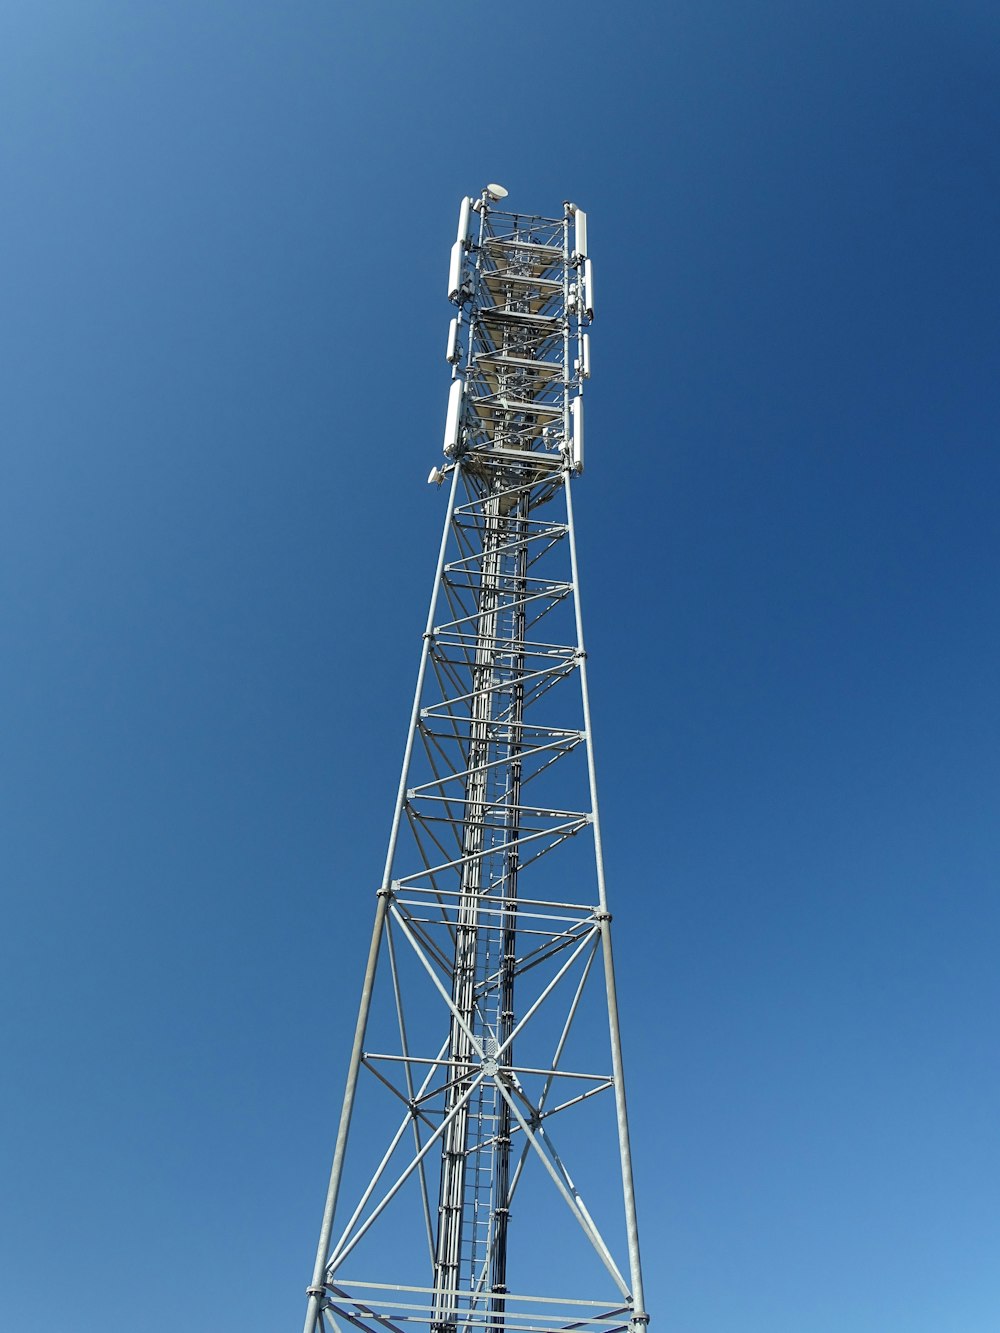 gray steel tower under blue sky during daytime